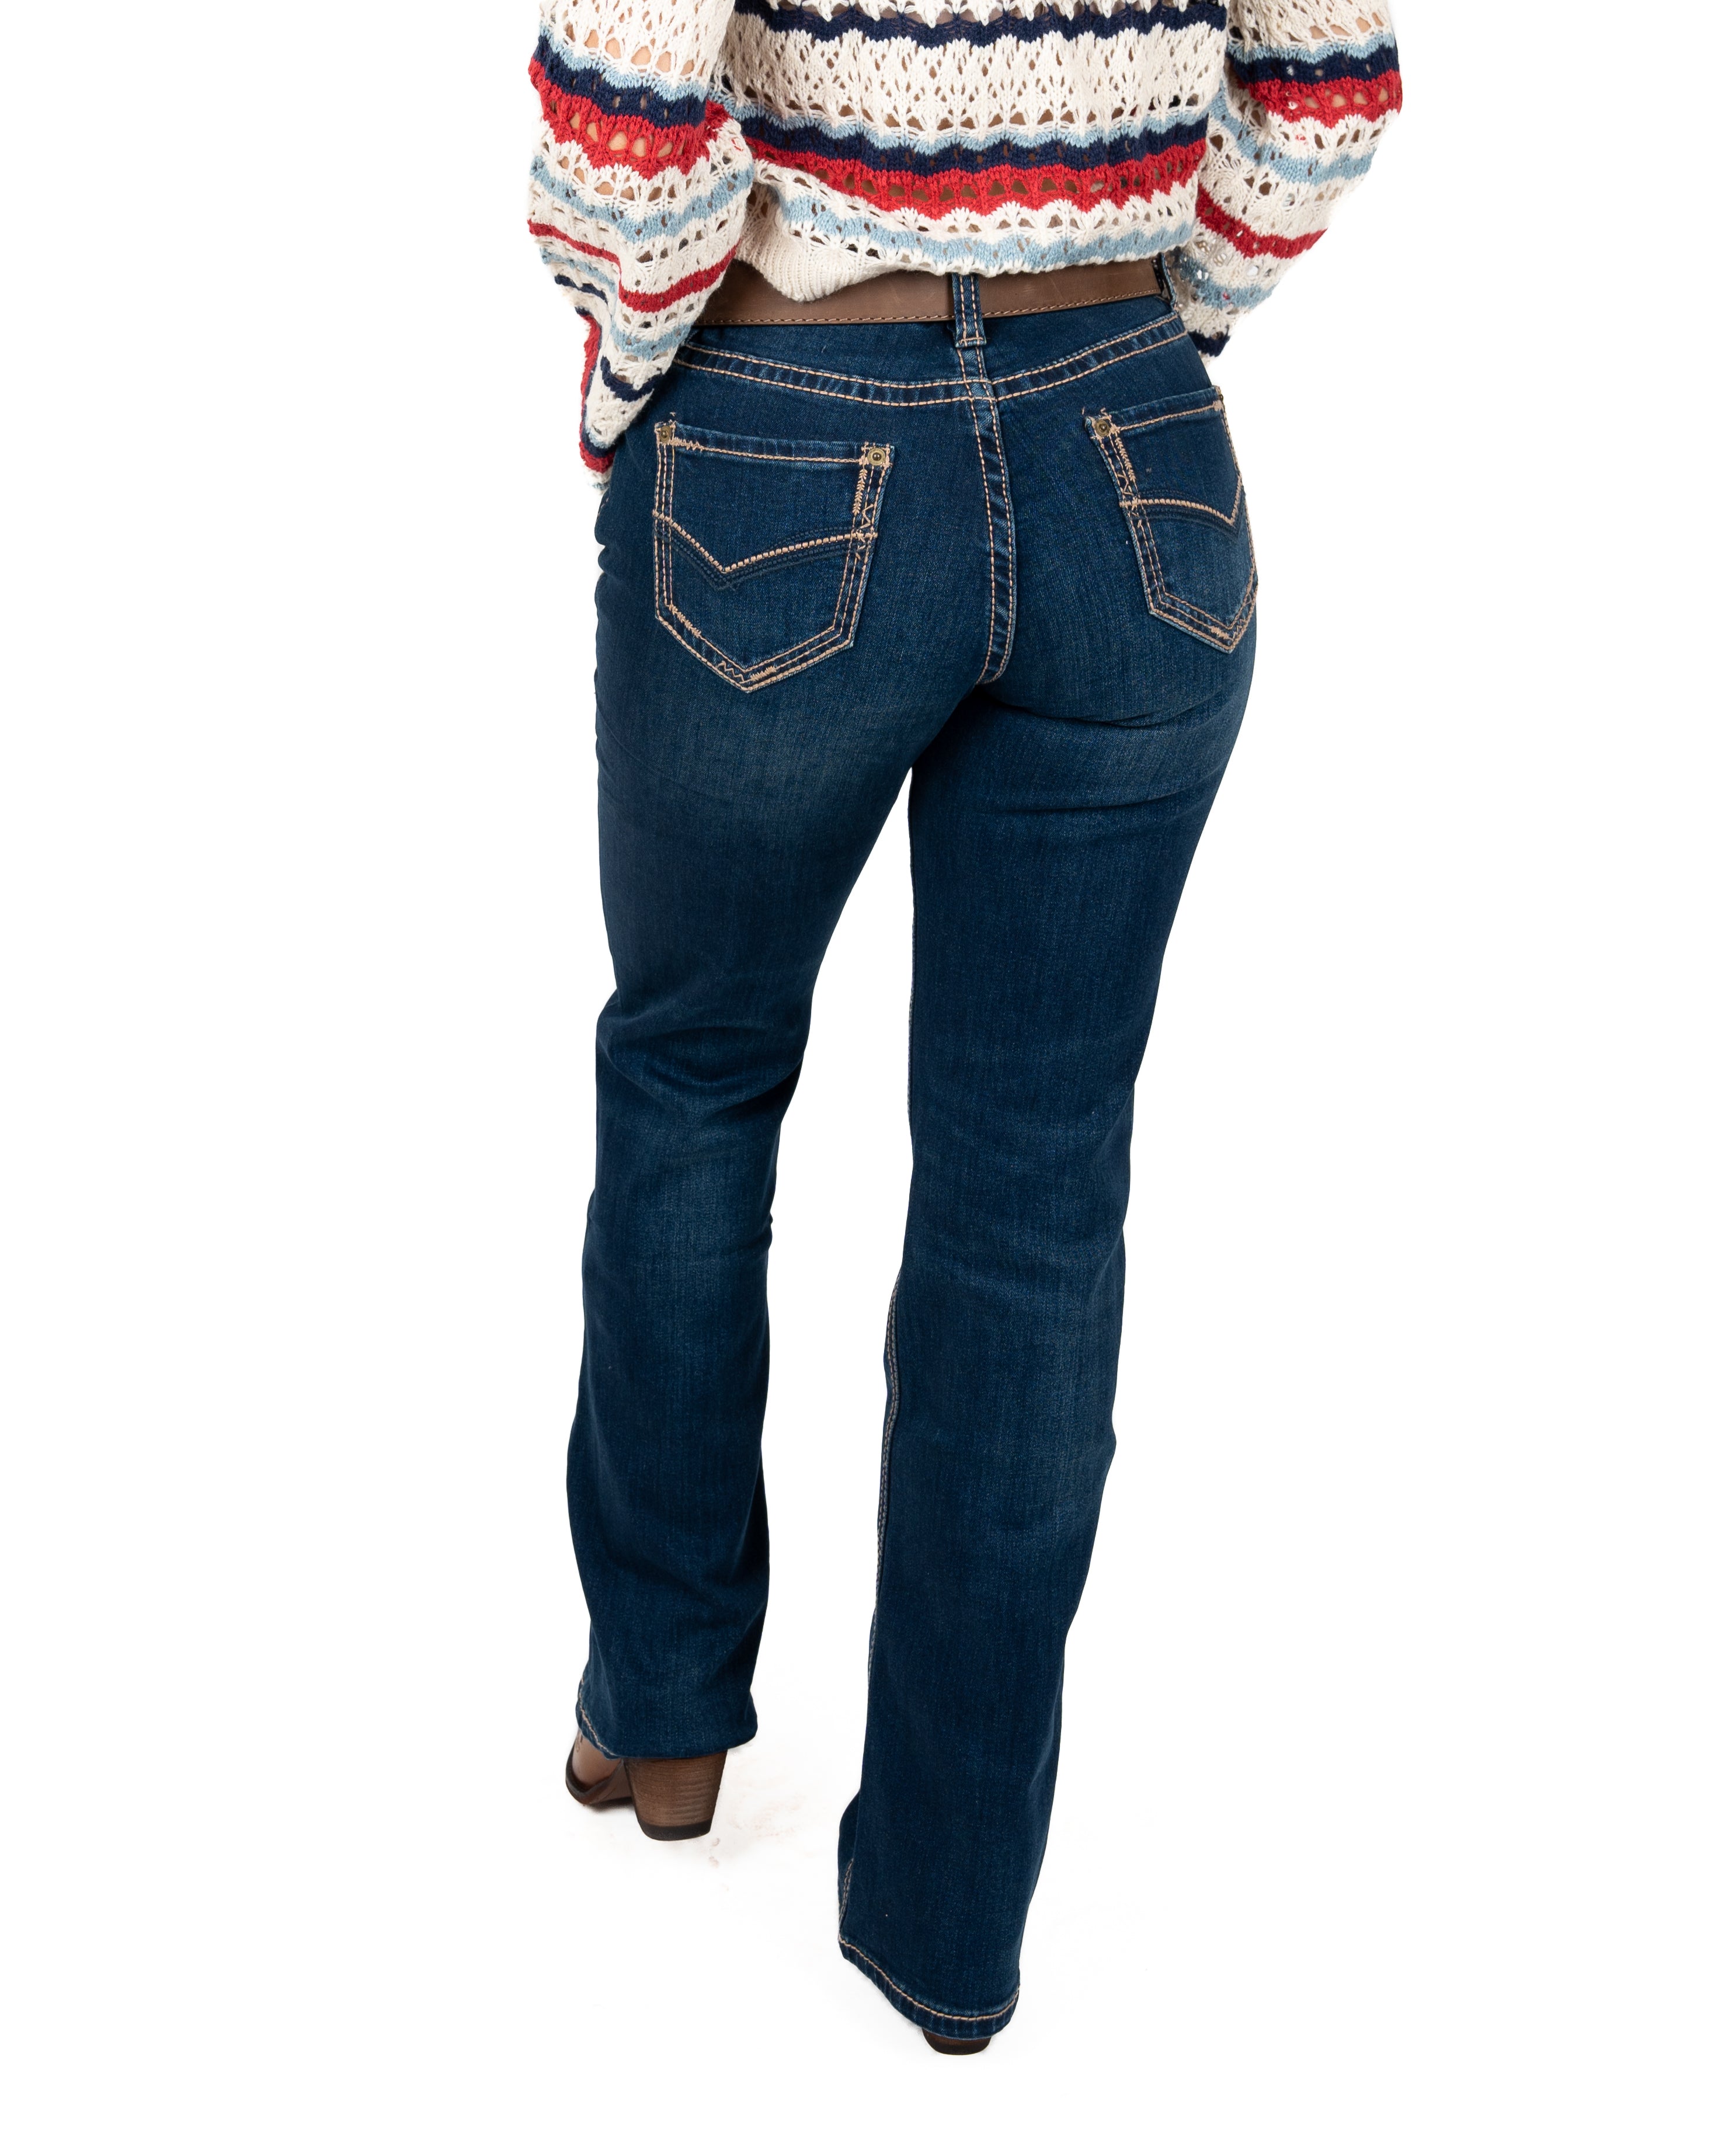 JEANS ROCK & ROLL DENIM MID RISE EXTRA STRETCH BOOTCUT RIDING DAMA